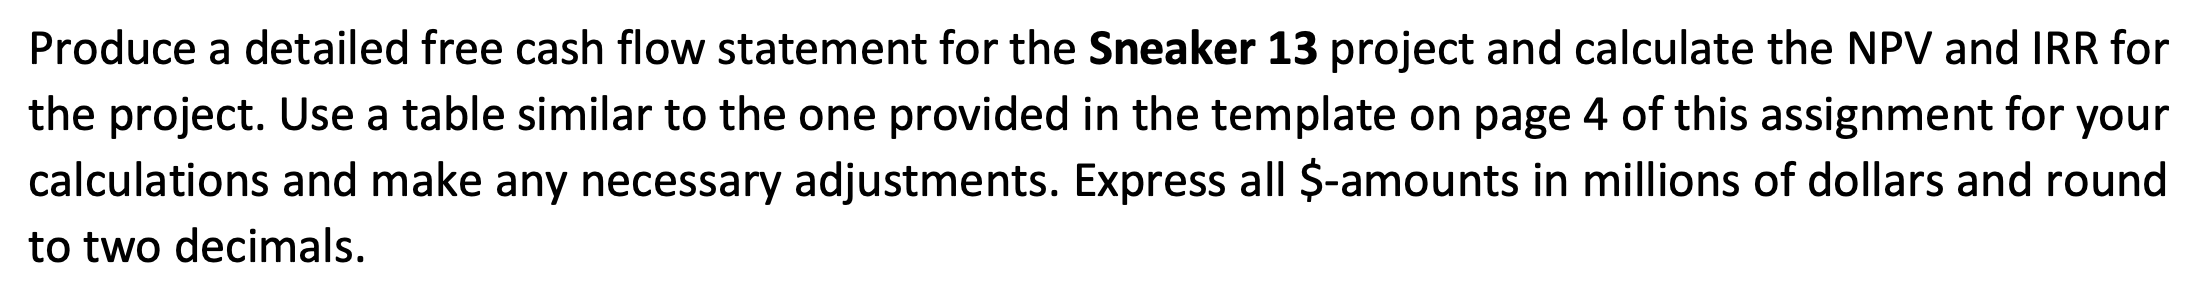 sneaker 2013 case study answers